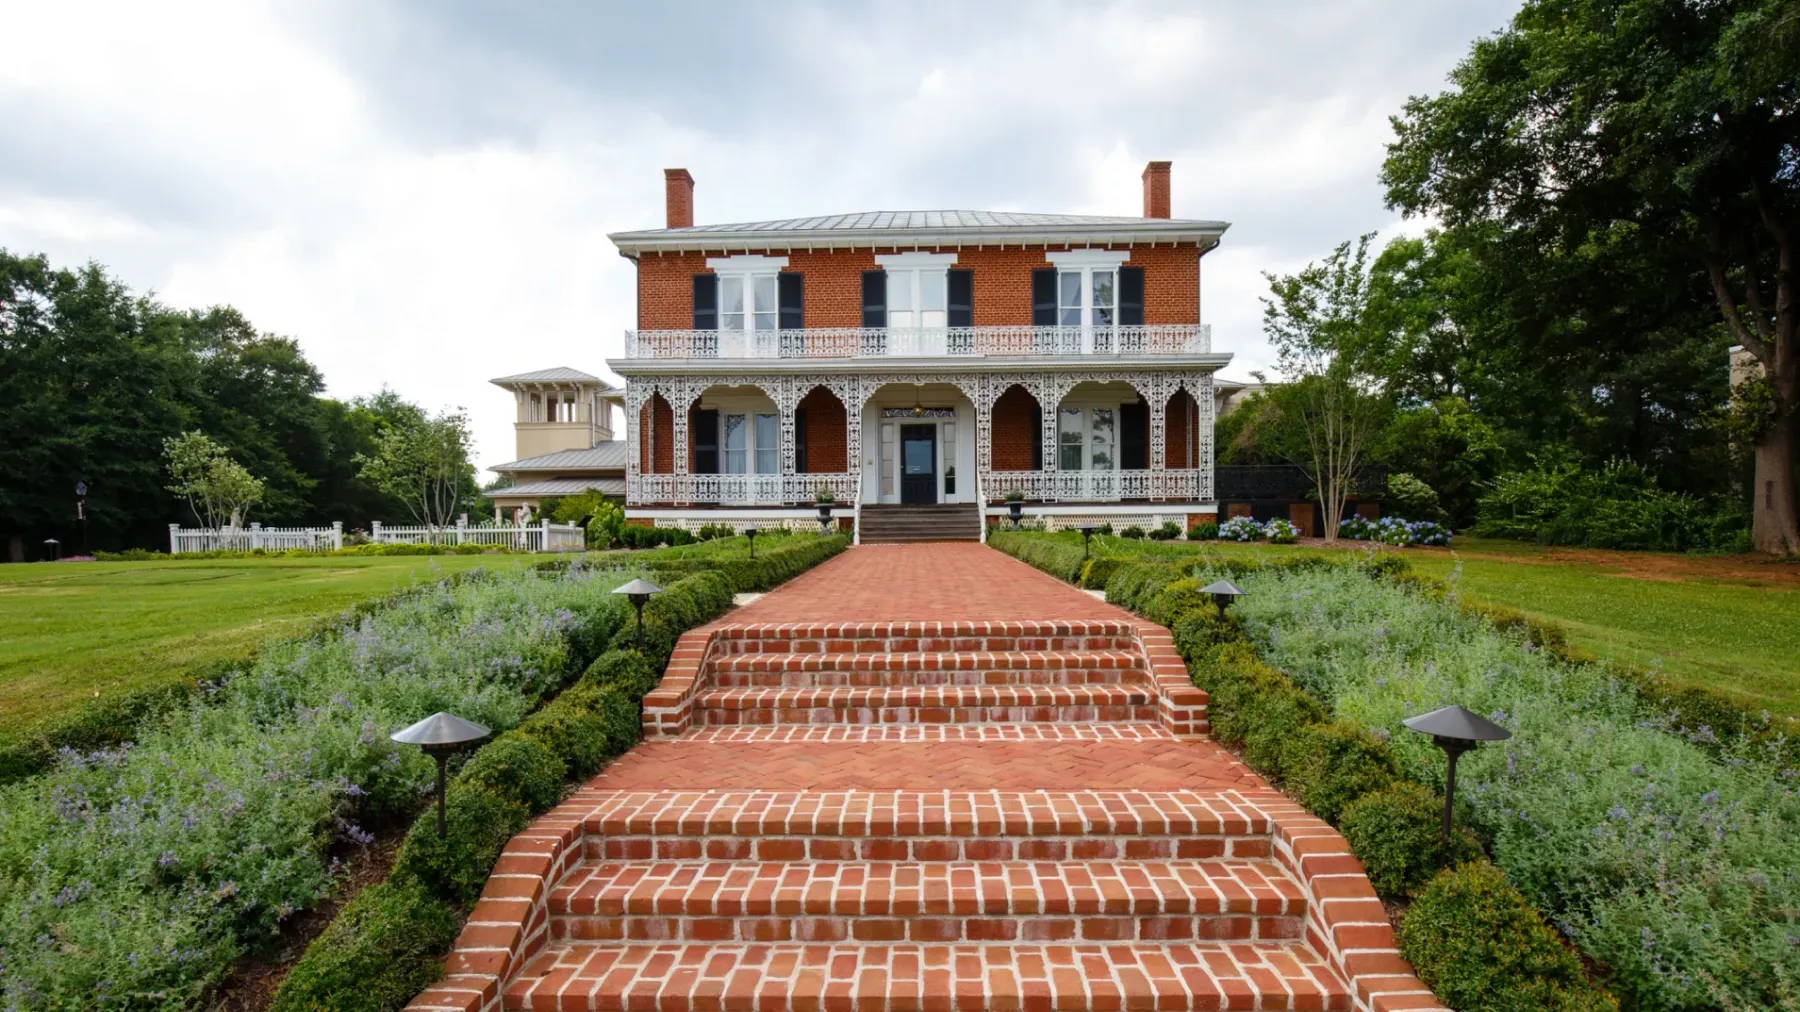 A large, two-story brick house with a wraparound porch and intricate white trim stands at the end of a wide brick path. The pathway features multiple steps leading through well-manicured gardens with low greenery and lantern-style lights. Trees surround the property.